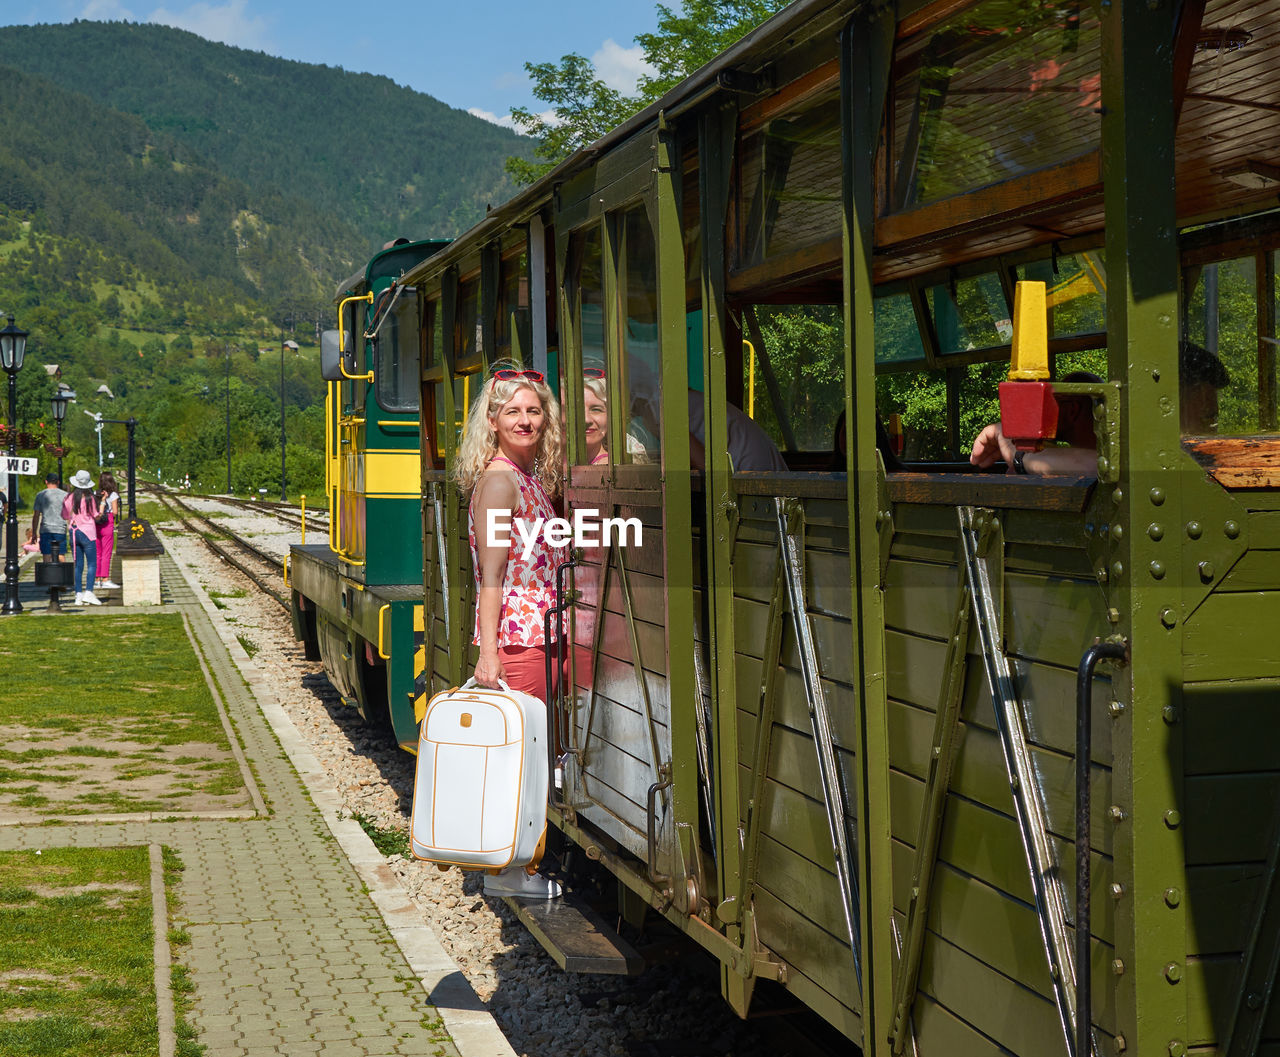 Woman holding a suitcase and getting on a vintage train - sarganska osmica